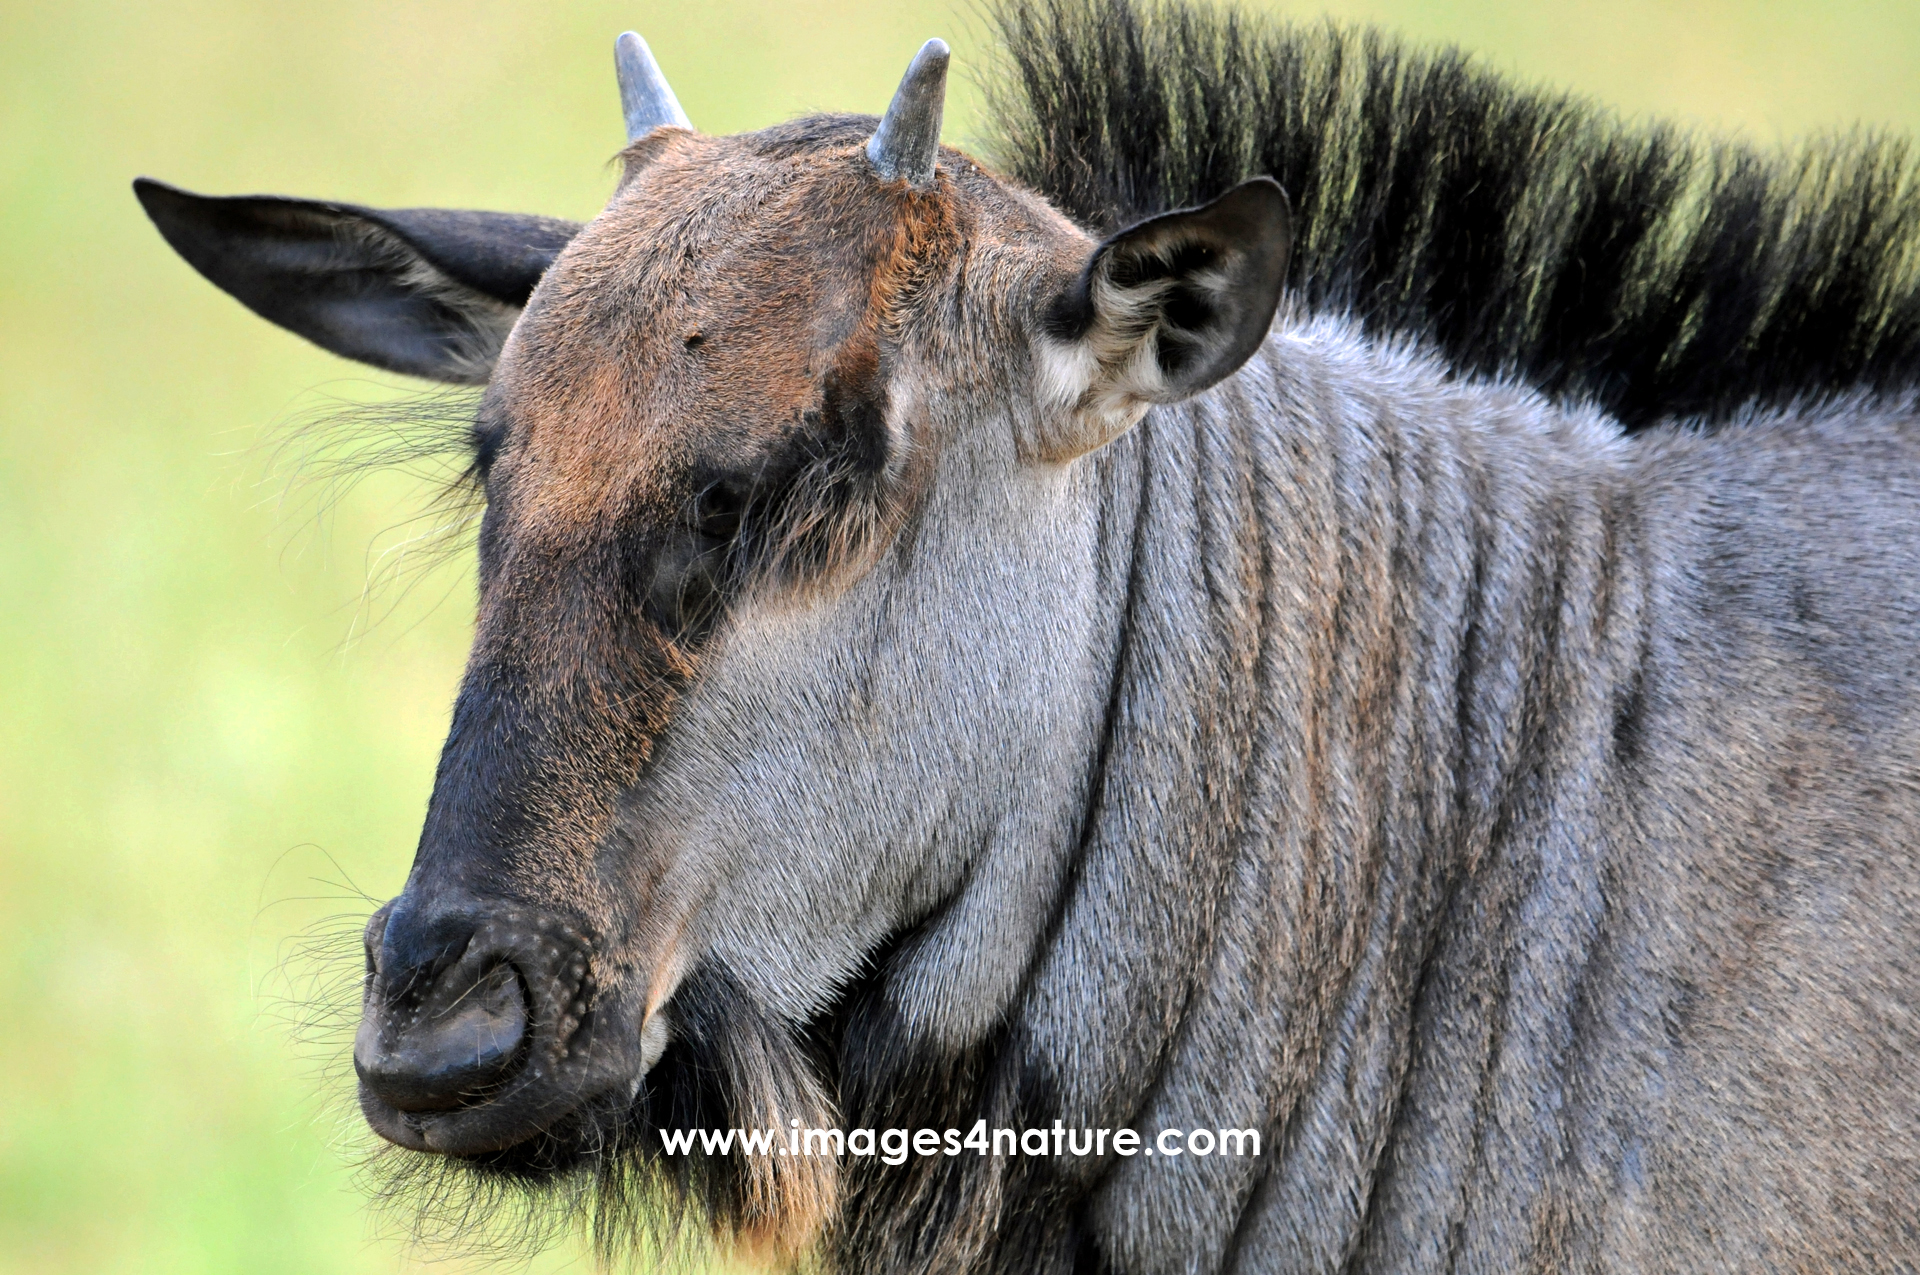 Portrait of a young gnu with little horns a its unique hairstyle